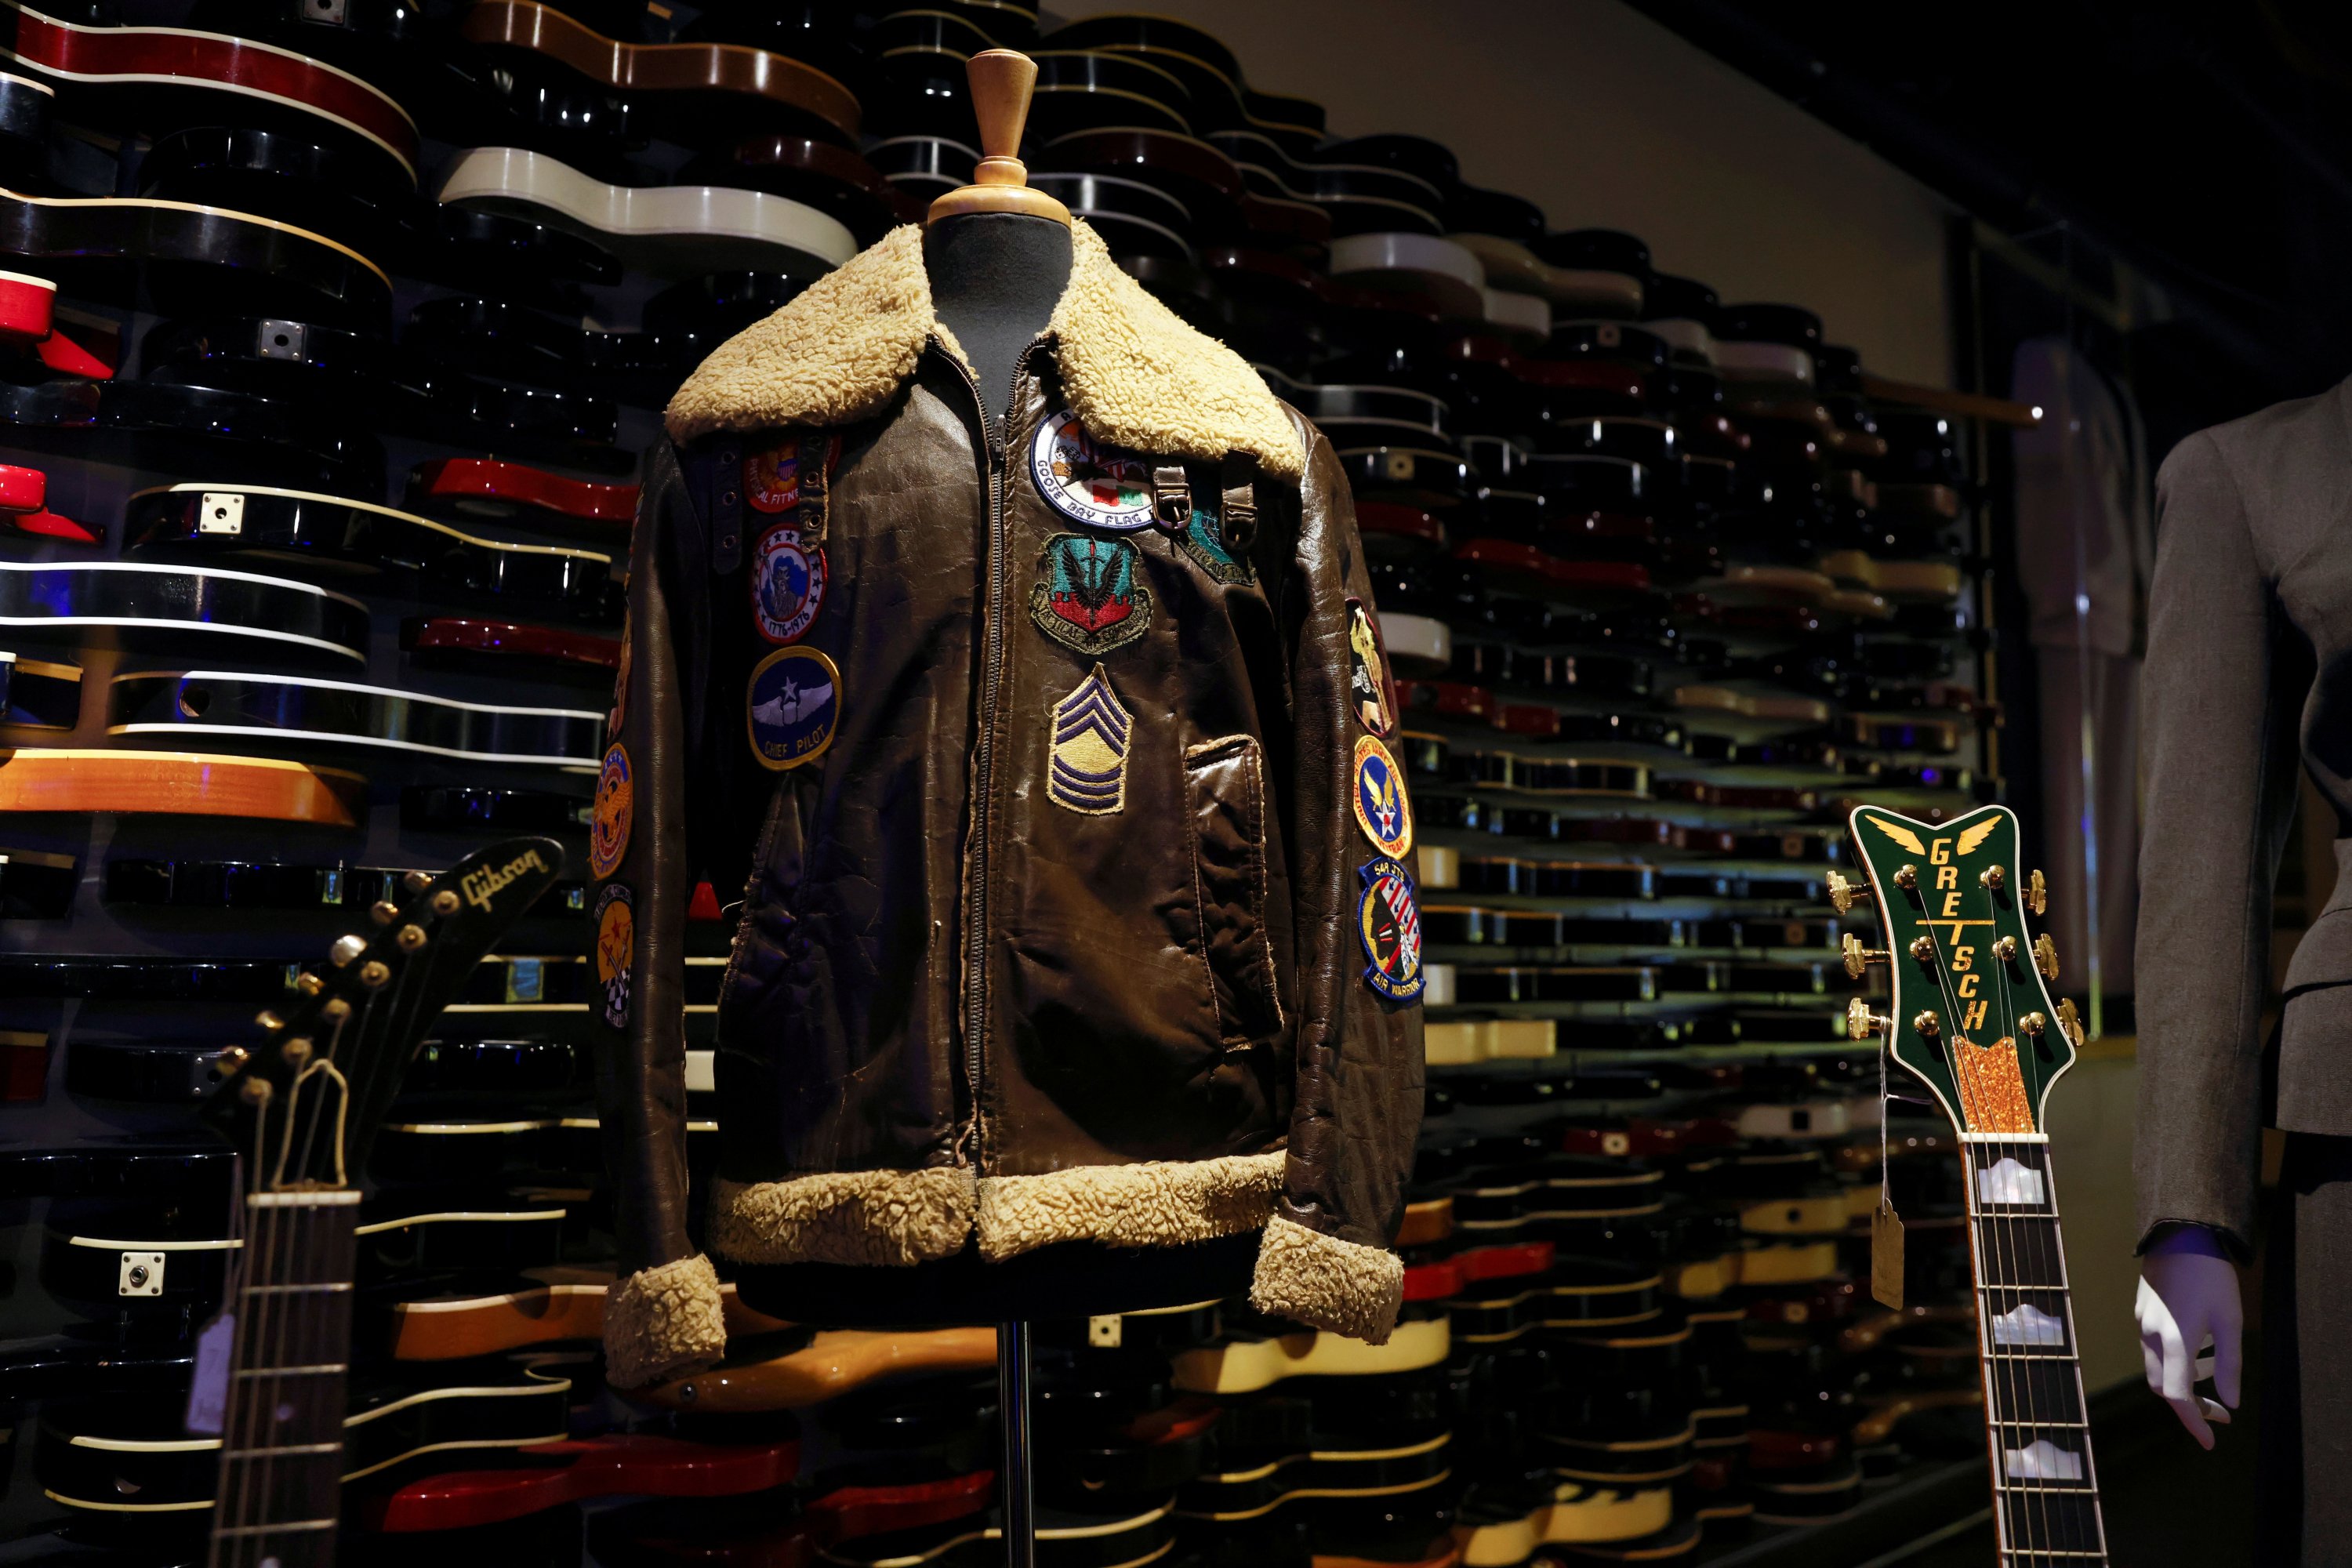 A World War II Pilot Jacket is worn by Michael Jackson sits on display at Julien's Auctions and Public Exhibition media preview at the Hard Rock Cafe at Times Square in New York City, U.S., Nov. 15, 2021. (REUTERS Photo)